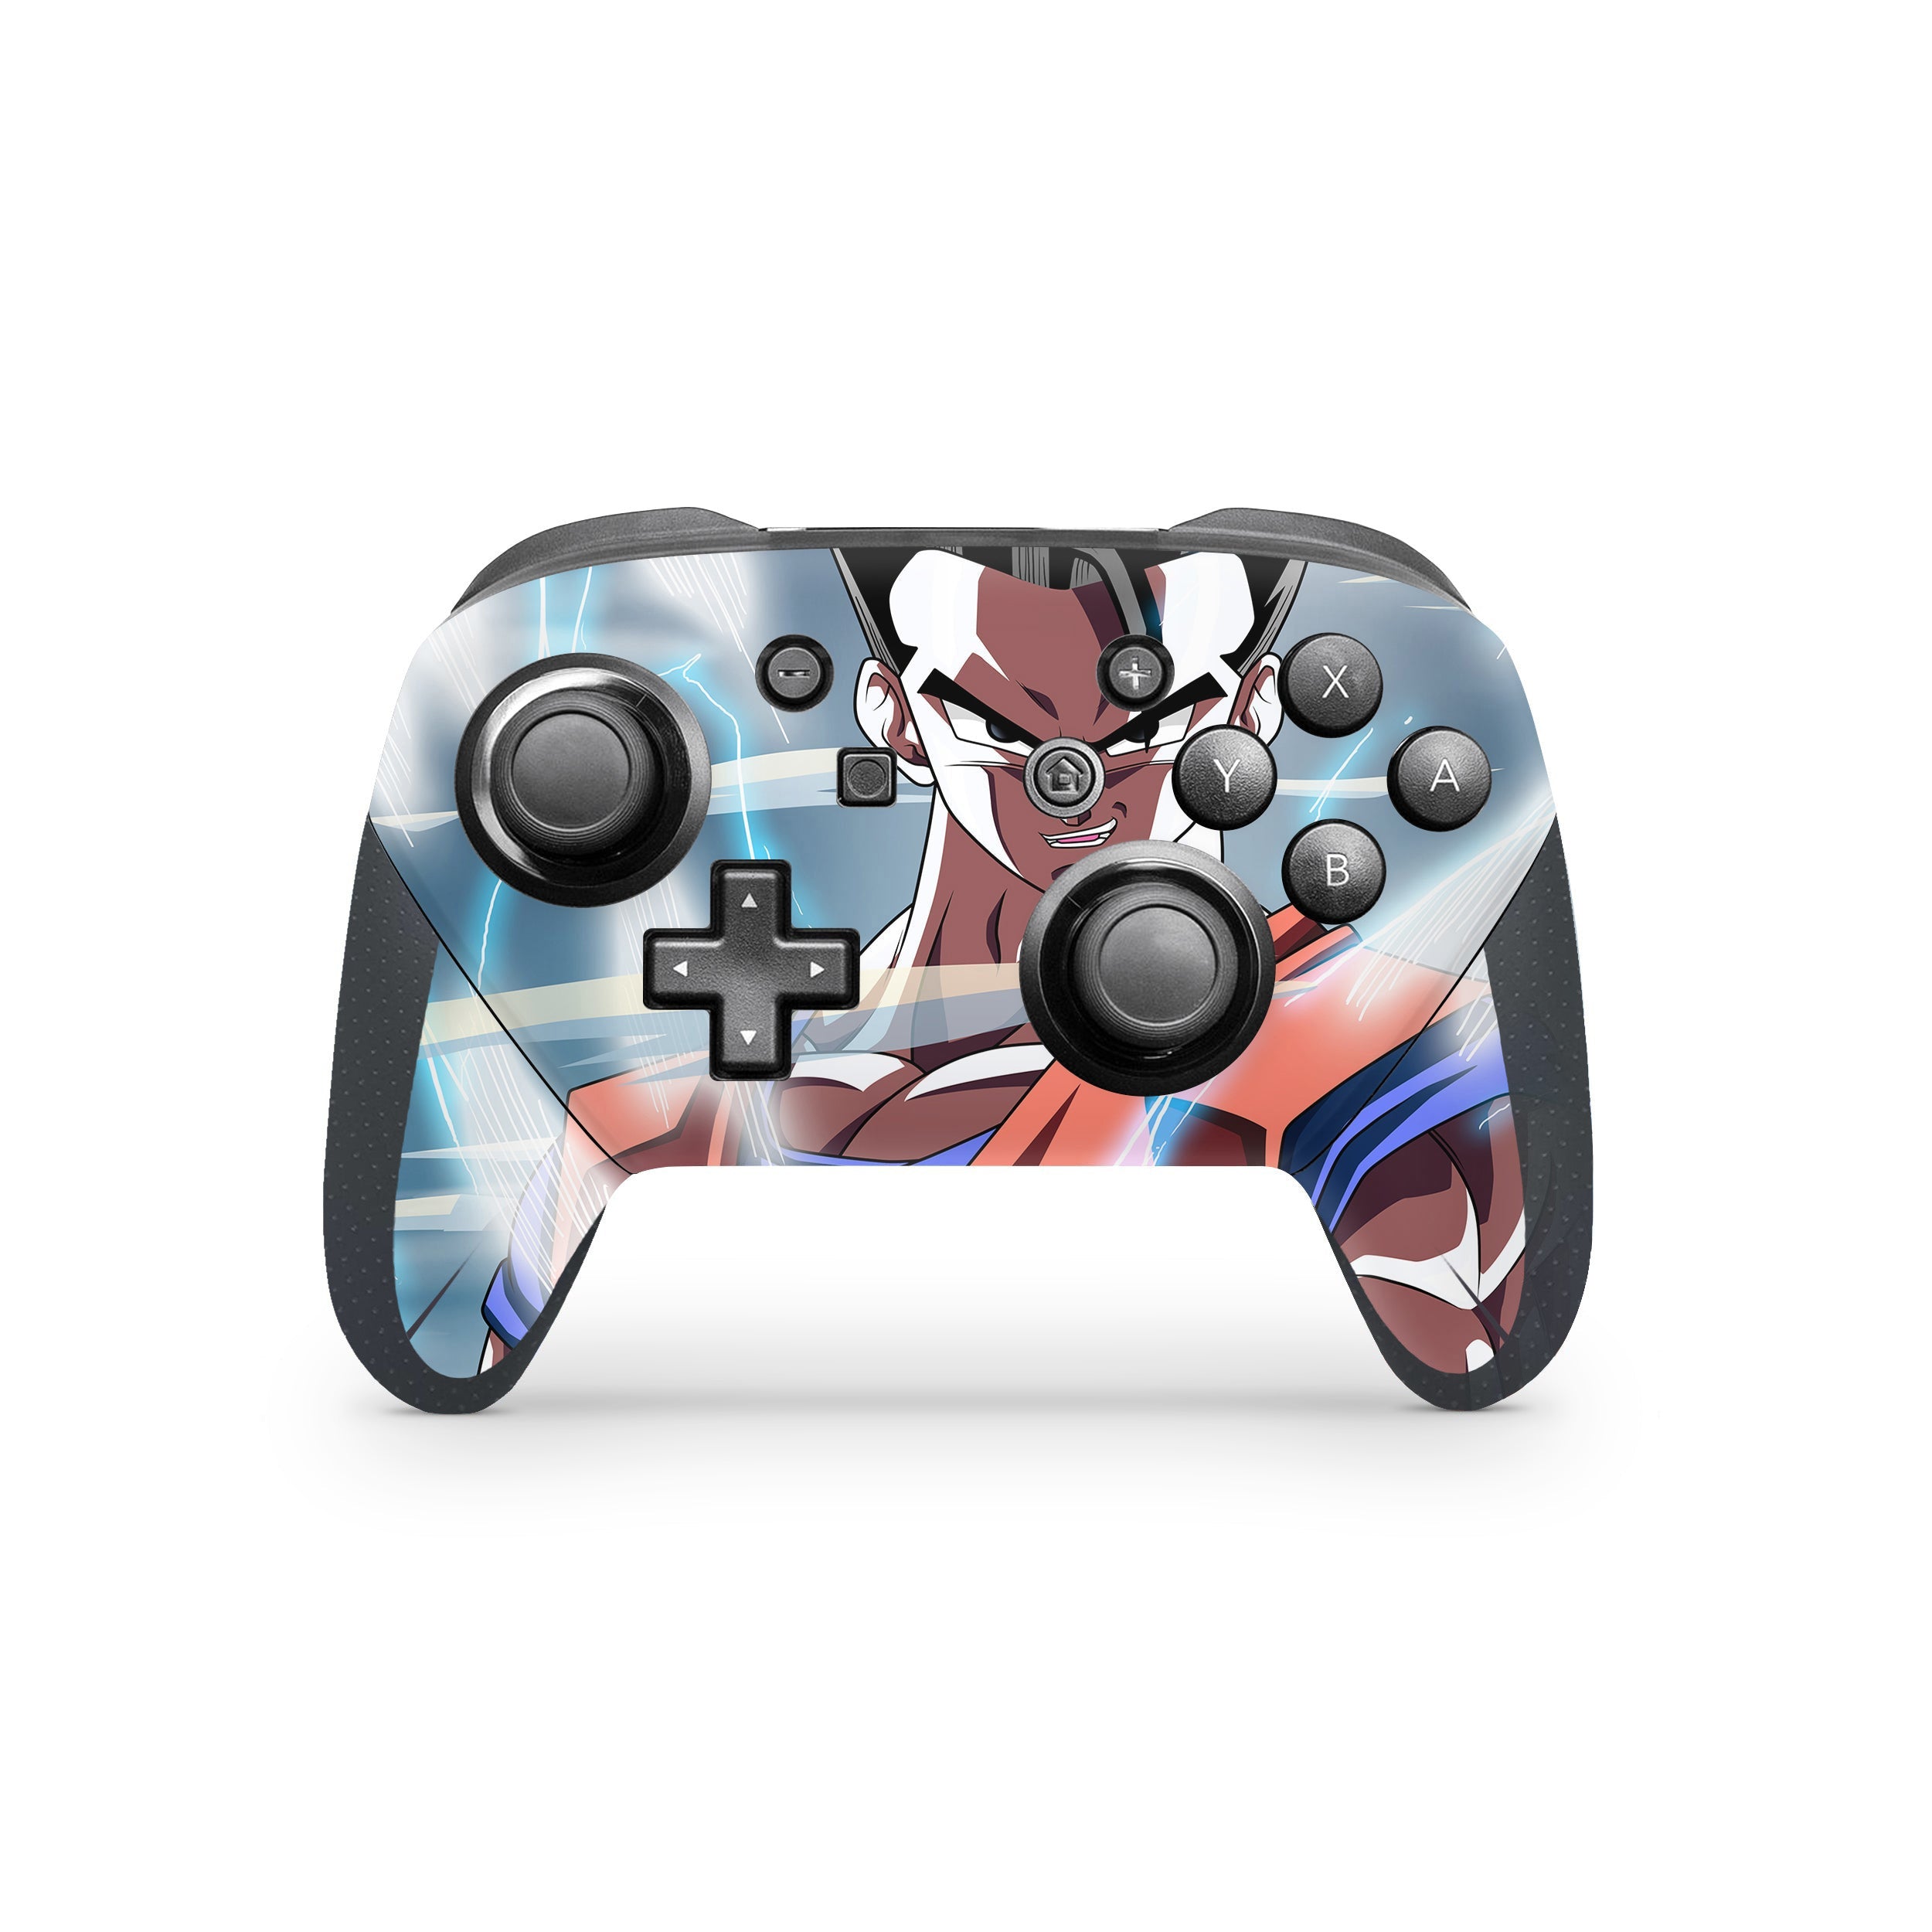 A video game skin featuring a Dragon Ball Z Gohan design for the Switch Pro Controller.